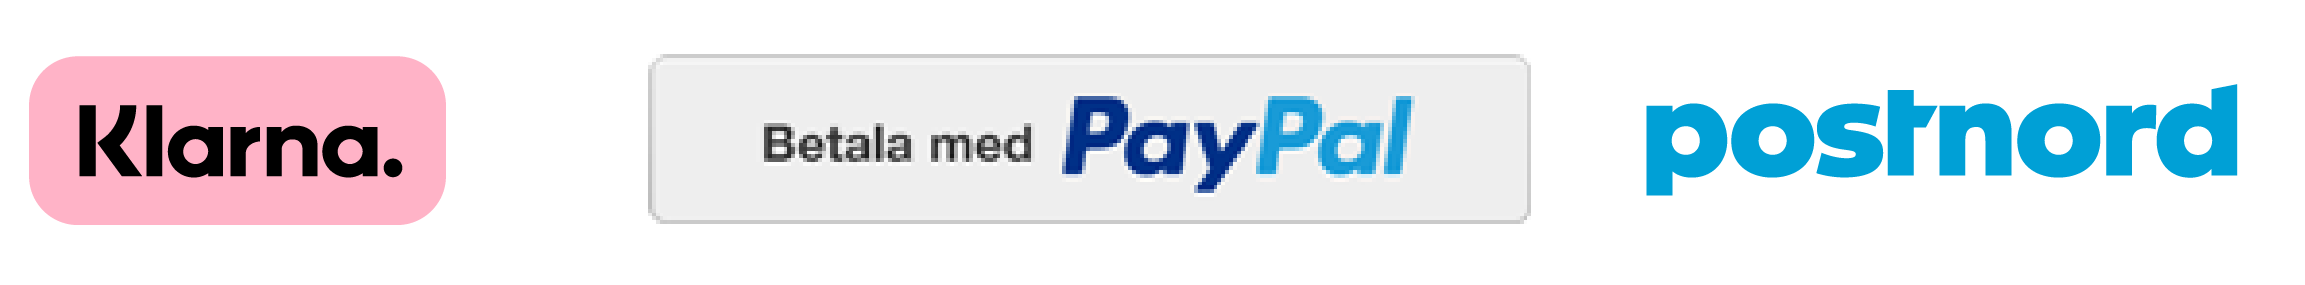 shipping and payment solutions - logos